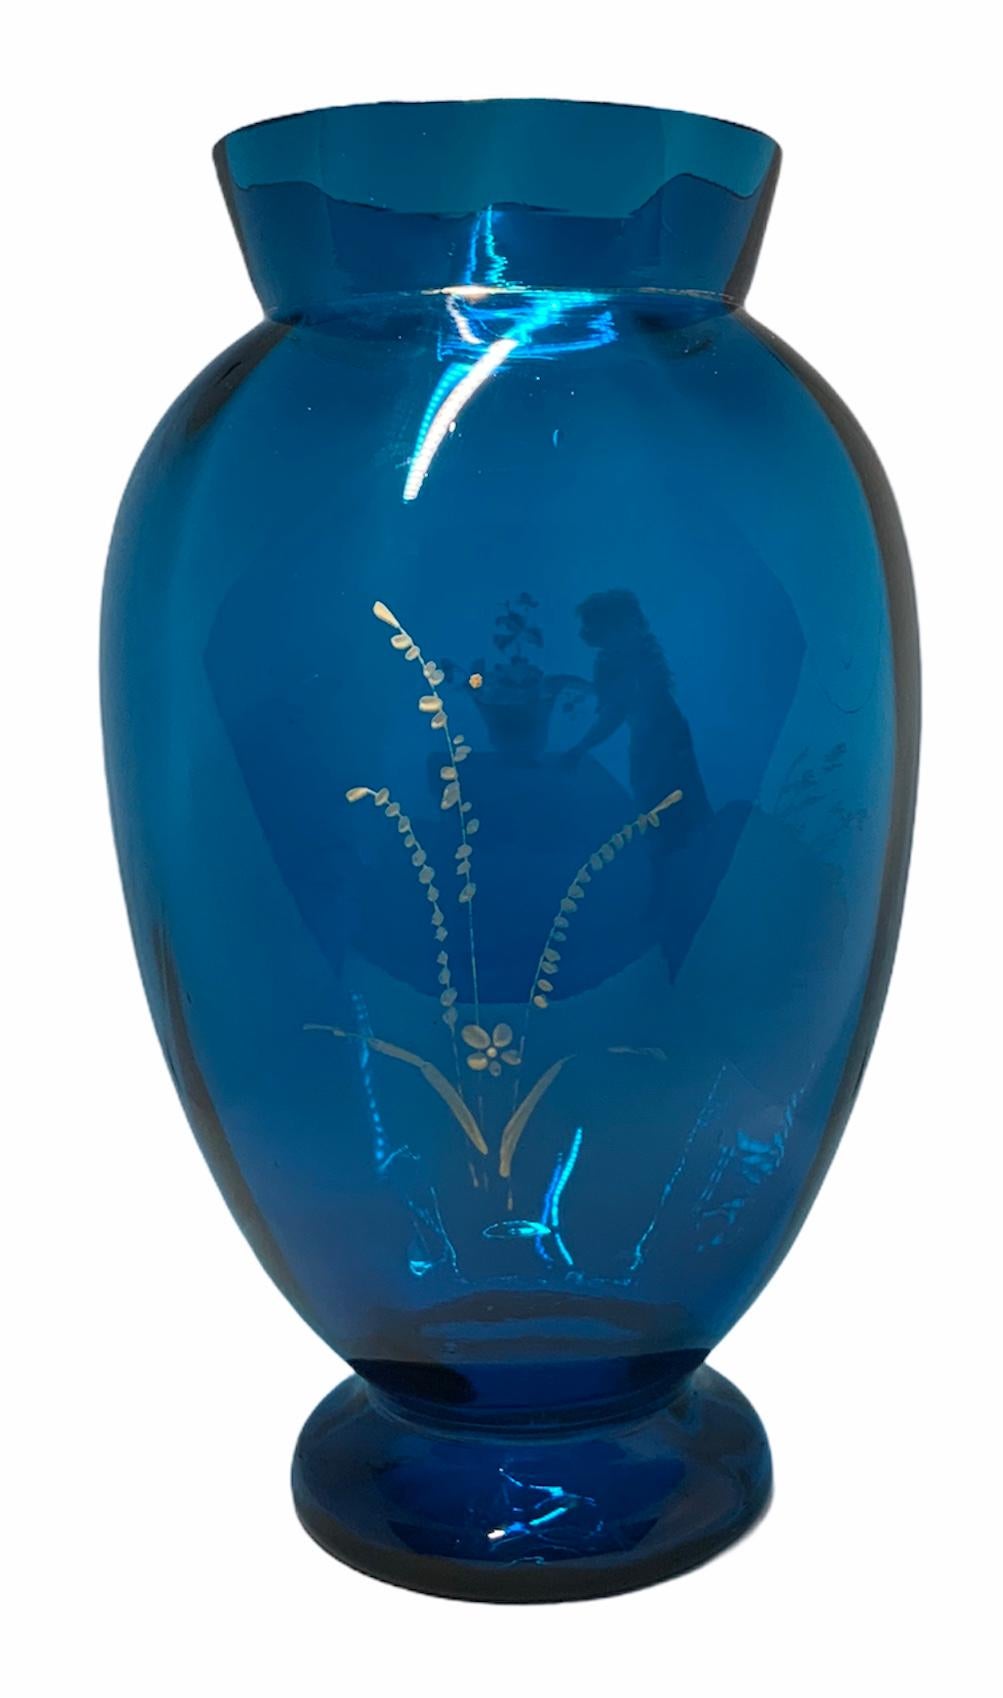 This is an urn shaped royal blue glass vase depicting a white enamel painting of a young girl standing in front of a table while making an arrangement of flowers.